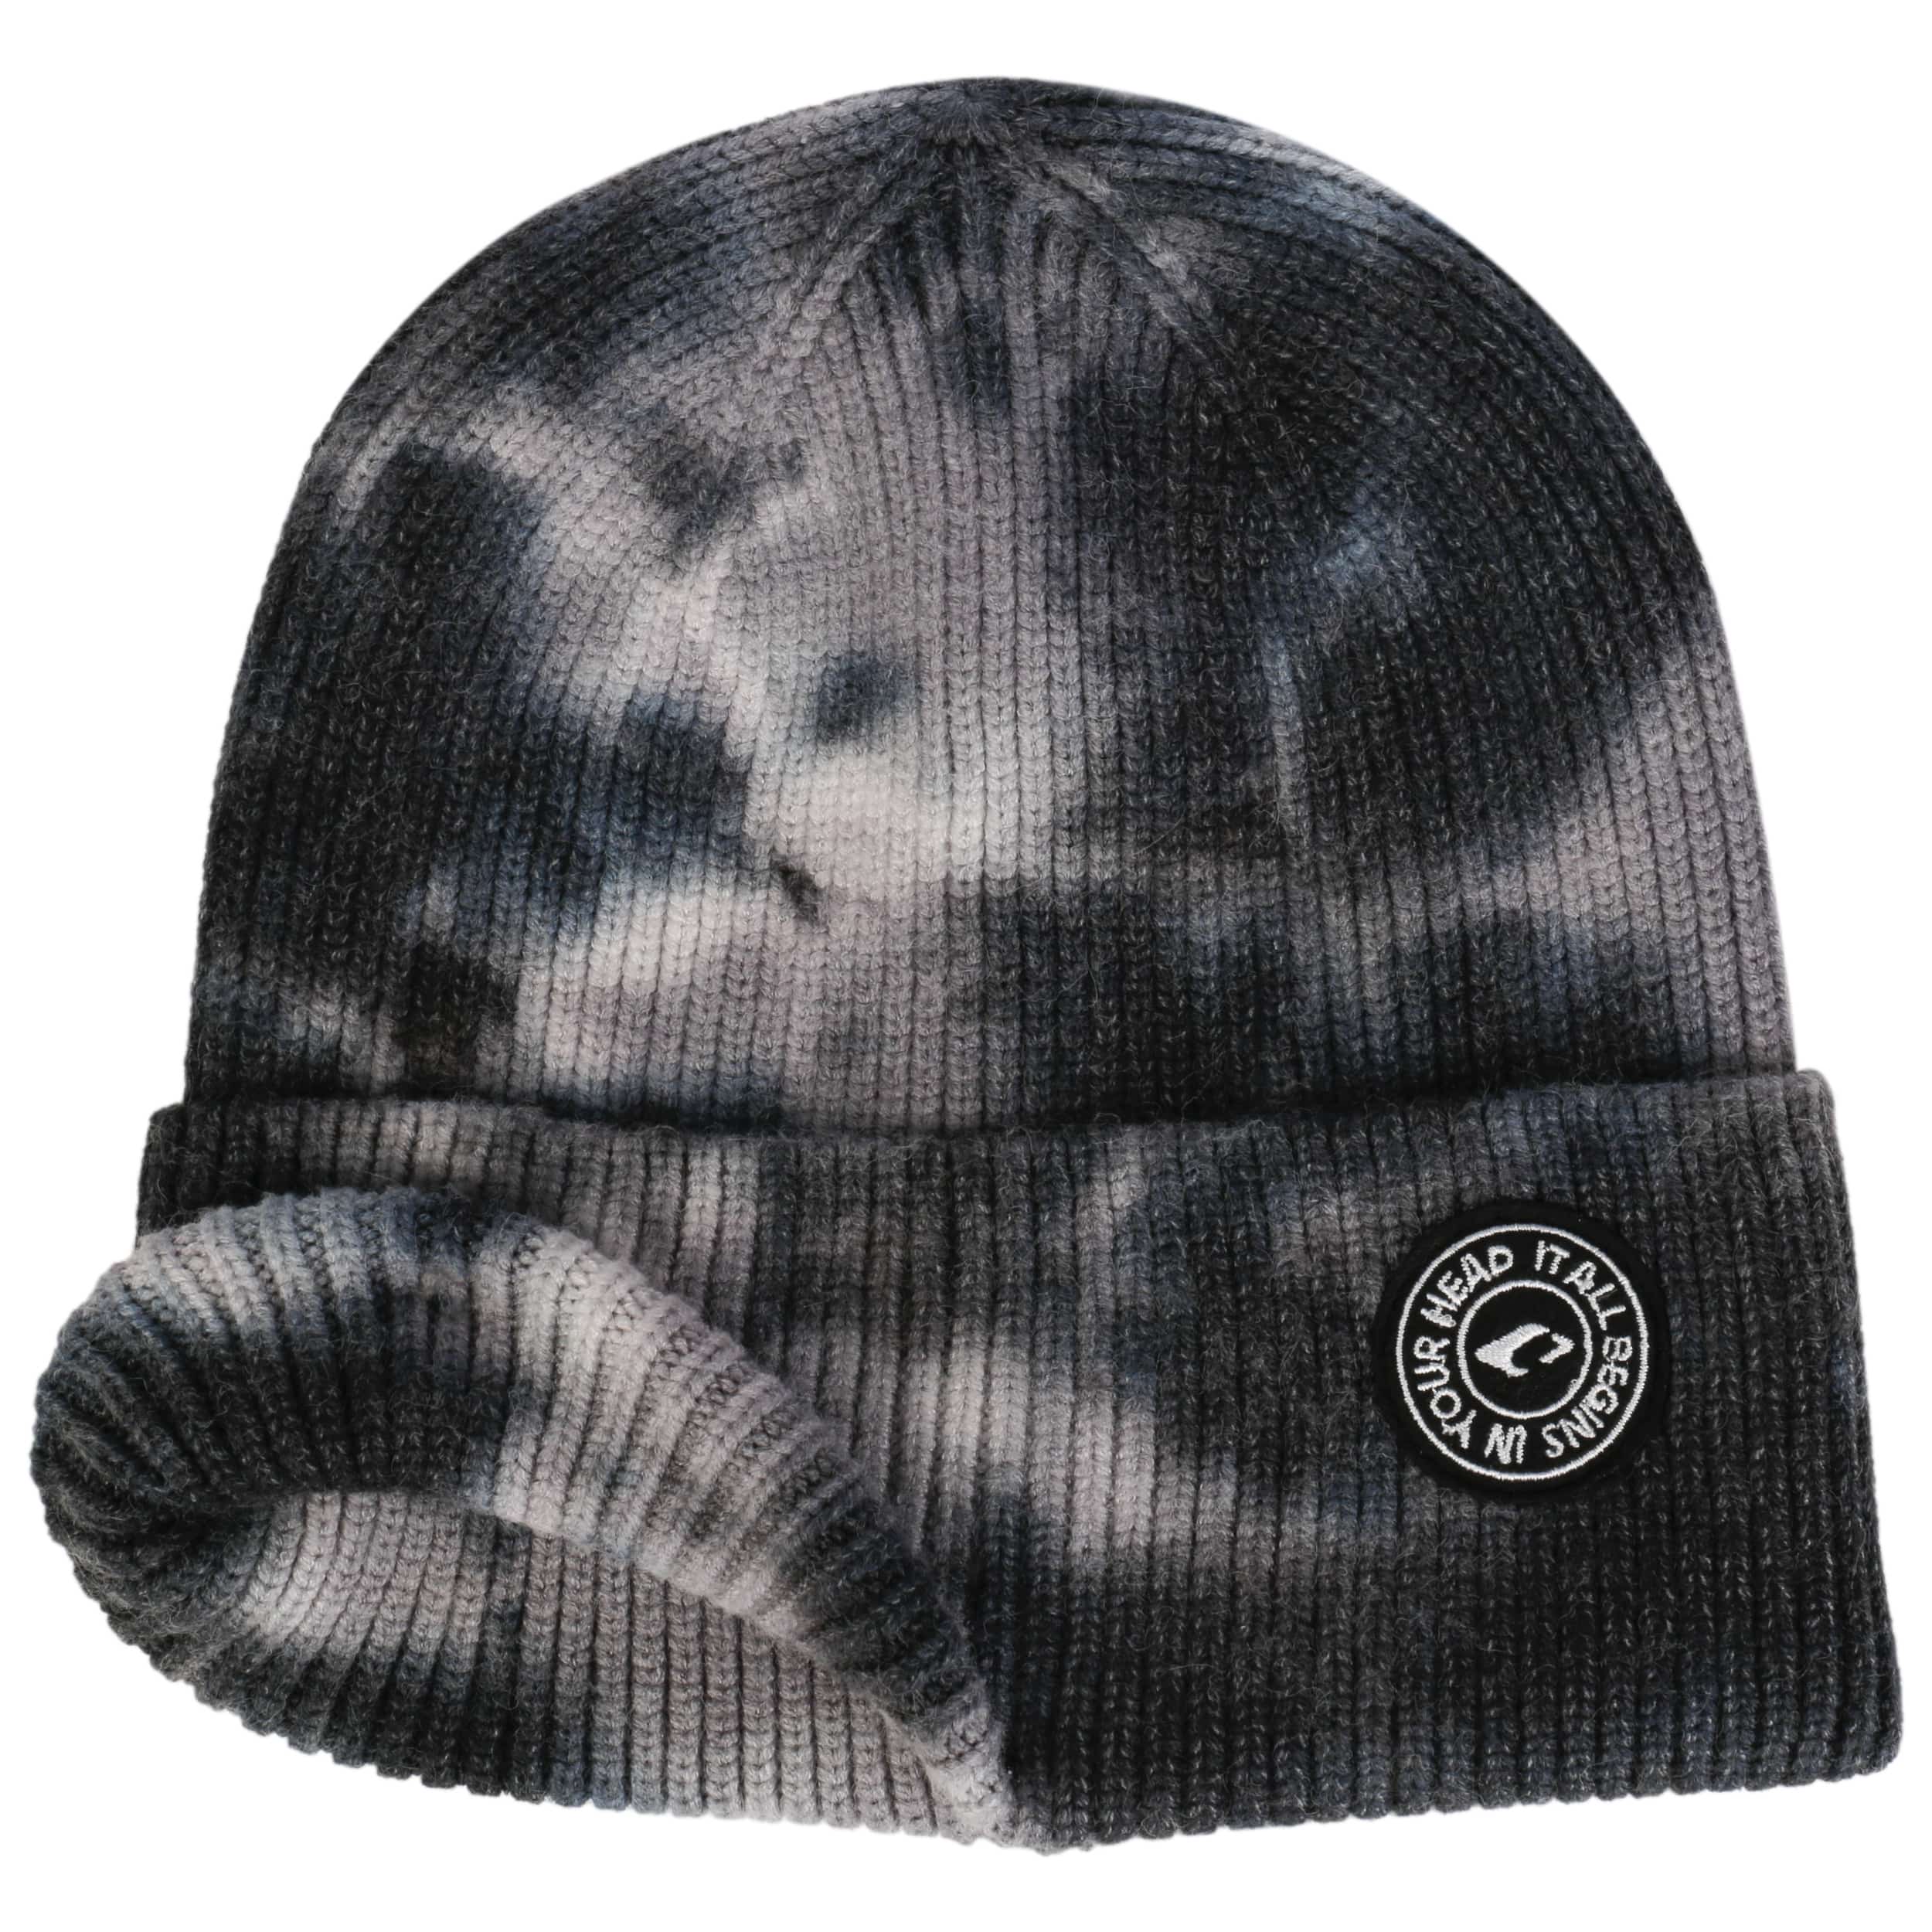 Yuna Tie Dye Beanie by 28,95 Chillouts Hat - €